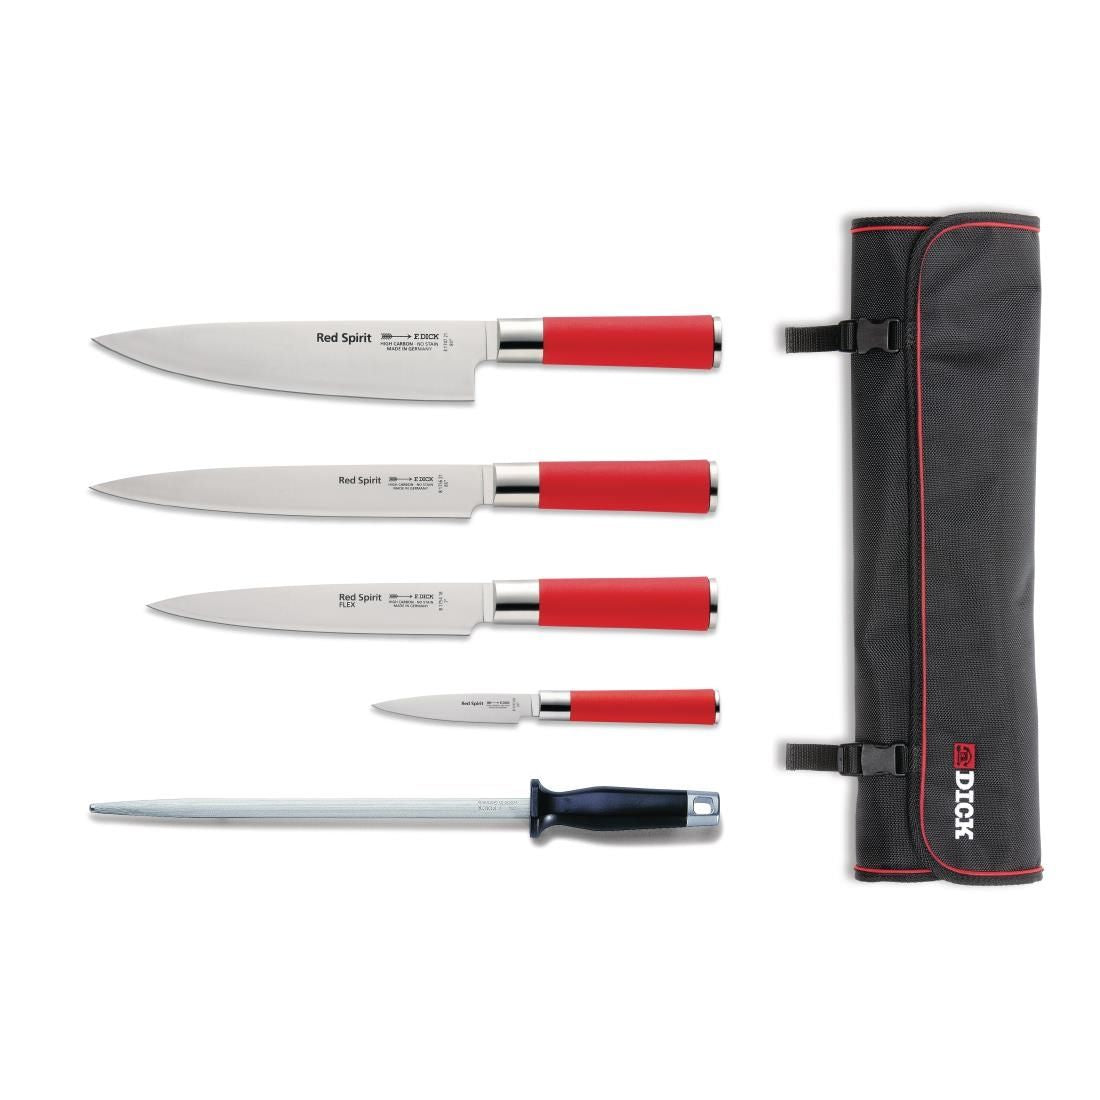 Dick Red Spirit 5 Piece Knife Set with Wallet JD Catering Equipment Solutions Ltd